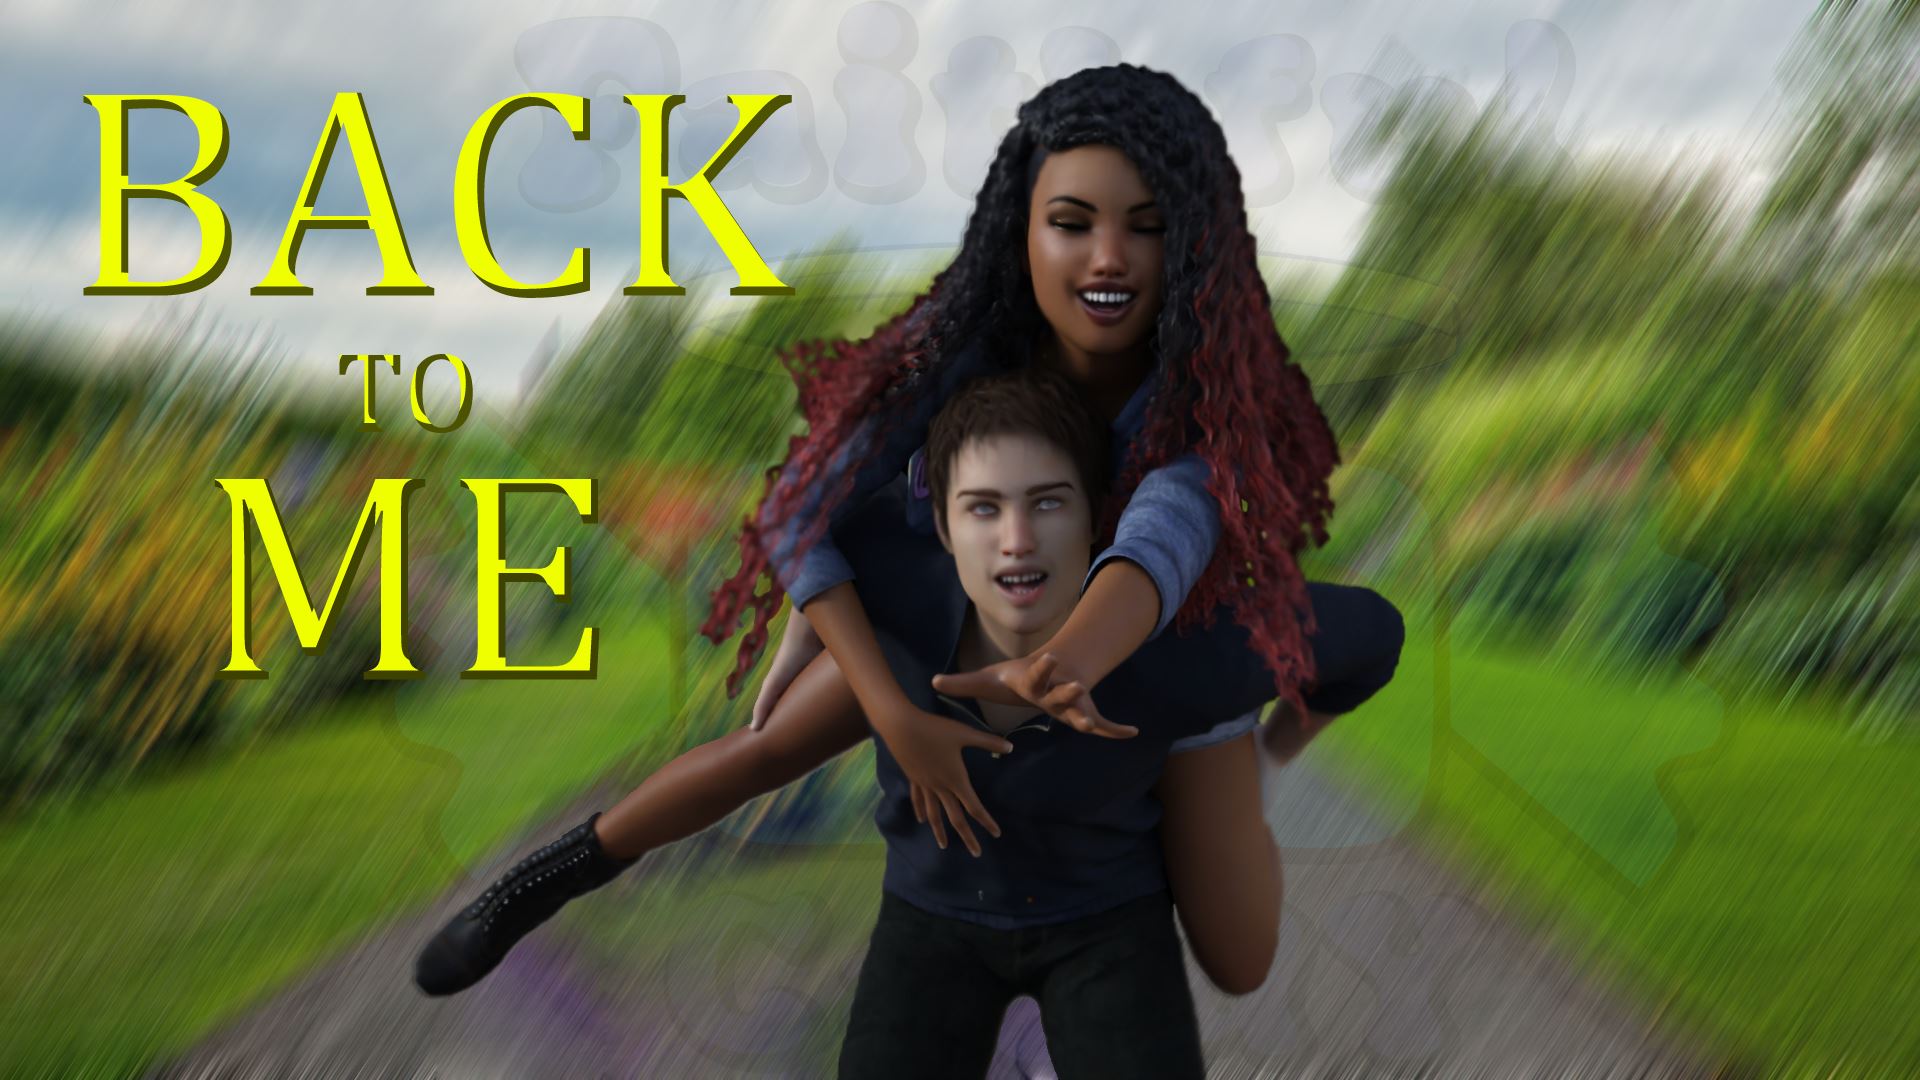 BACK to ME porn xxx game download cover